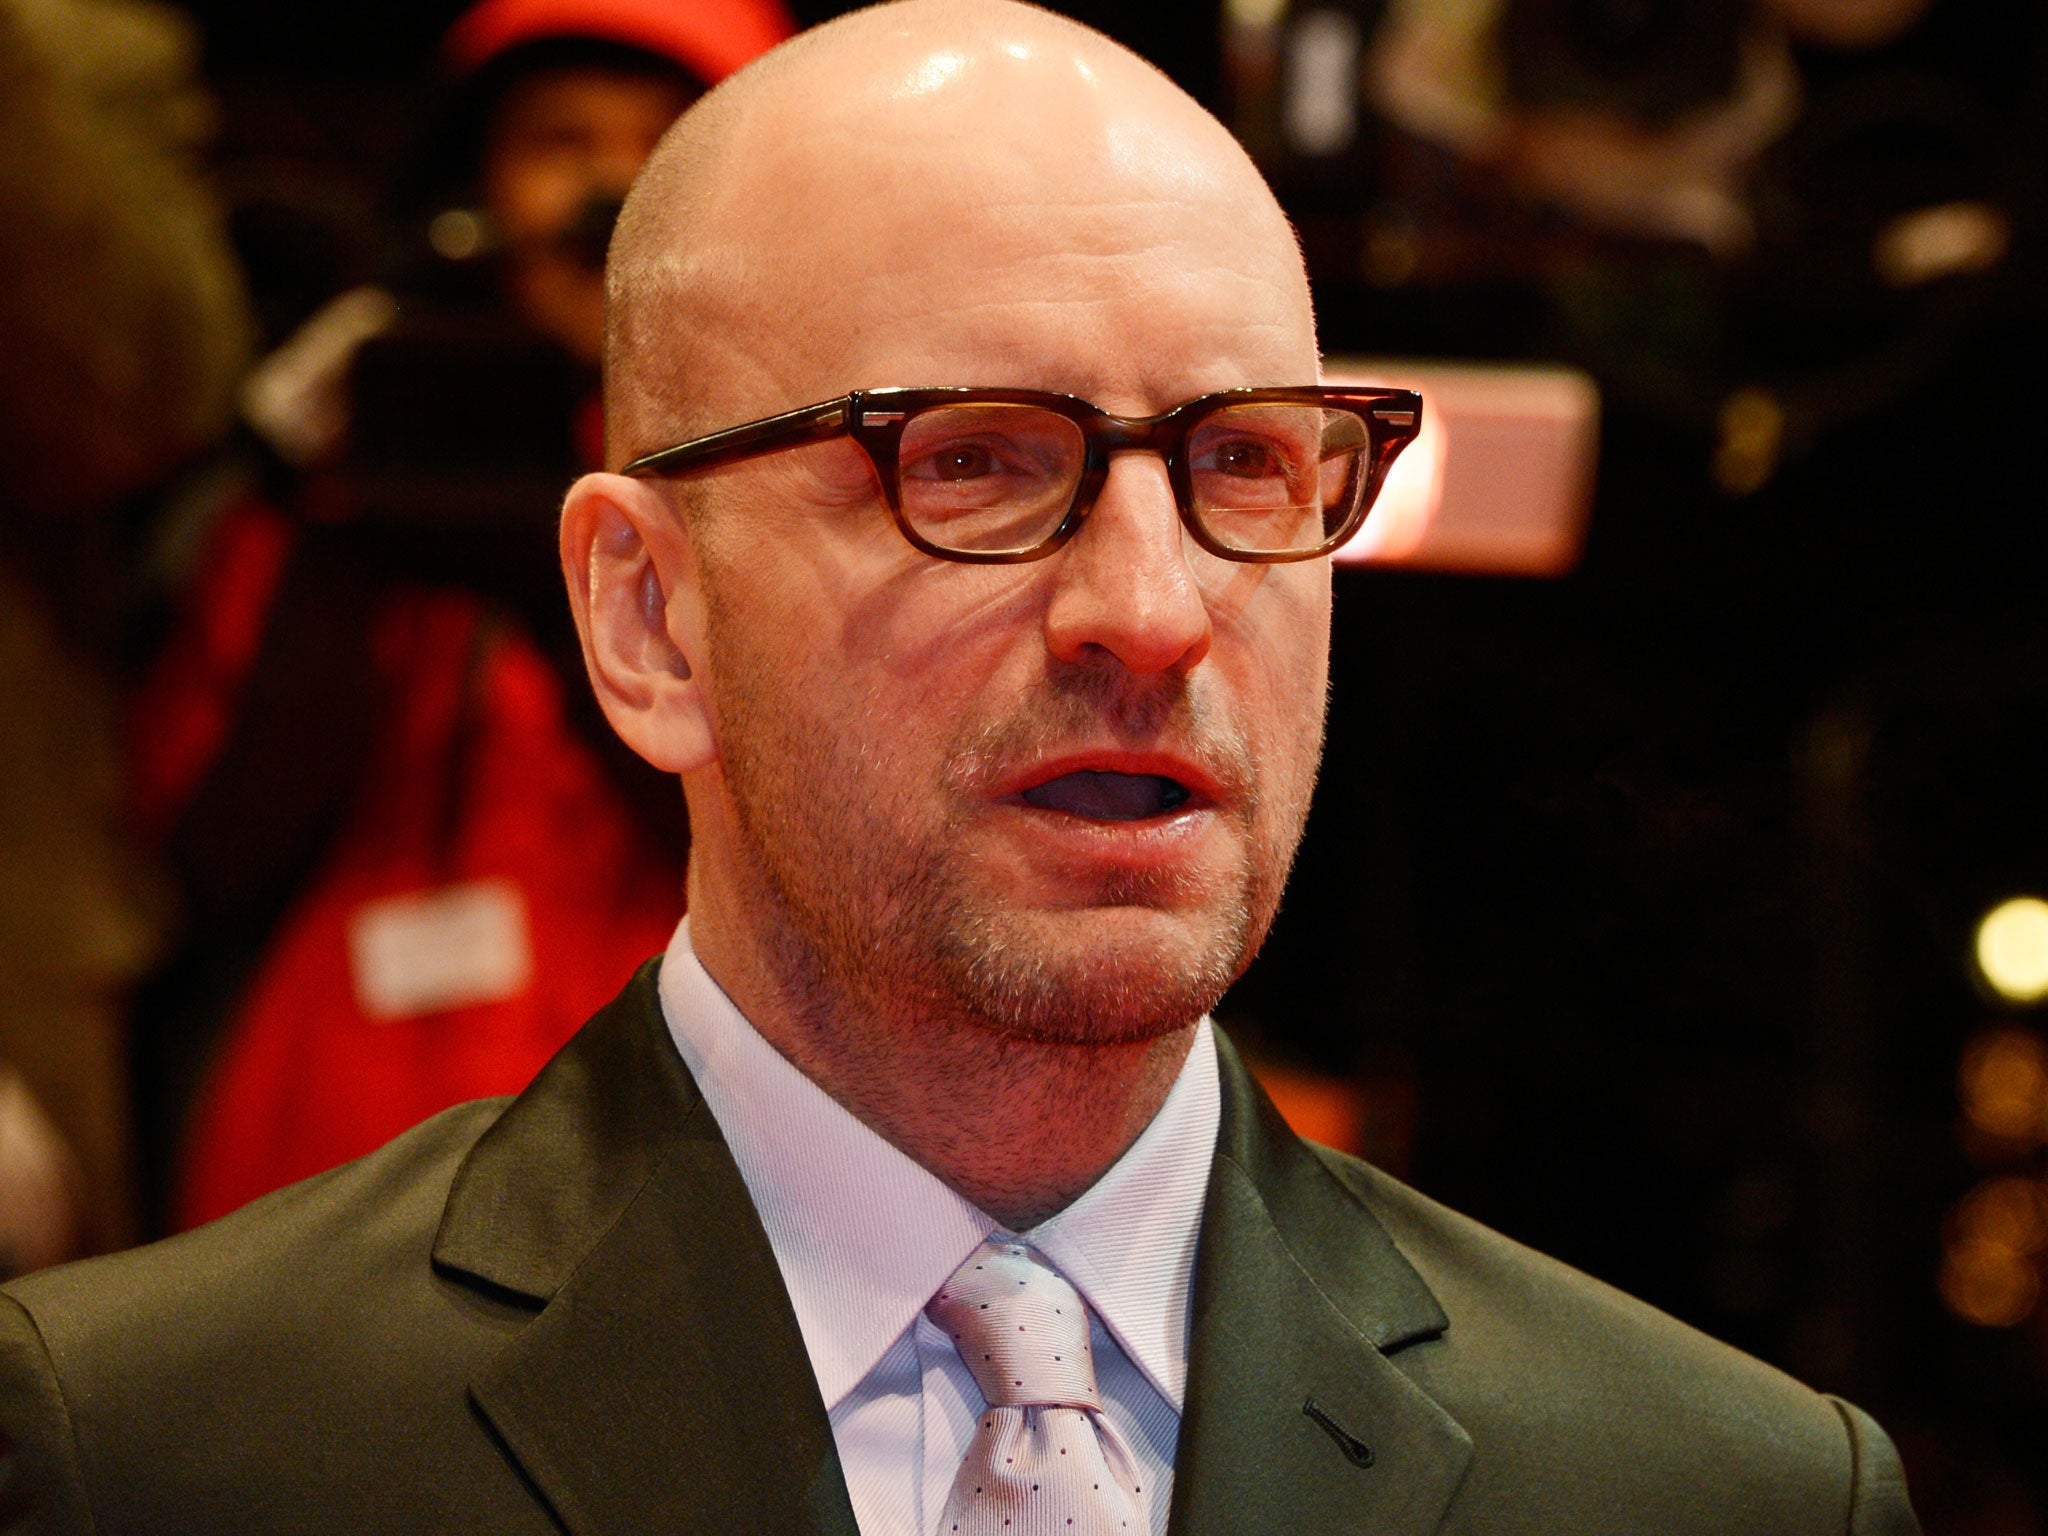 The filmmaker Steven Soderbergh appears to be writing a novella composed entirely of tweets